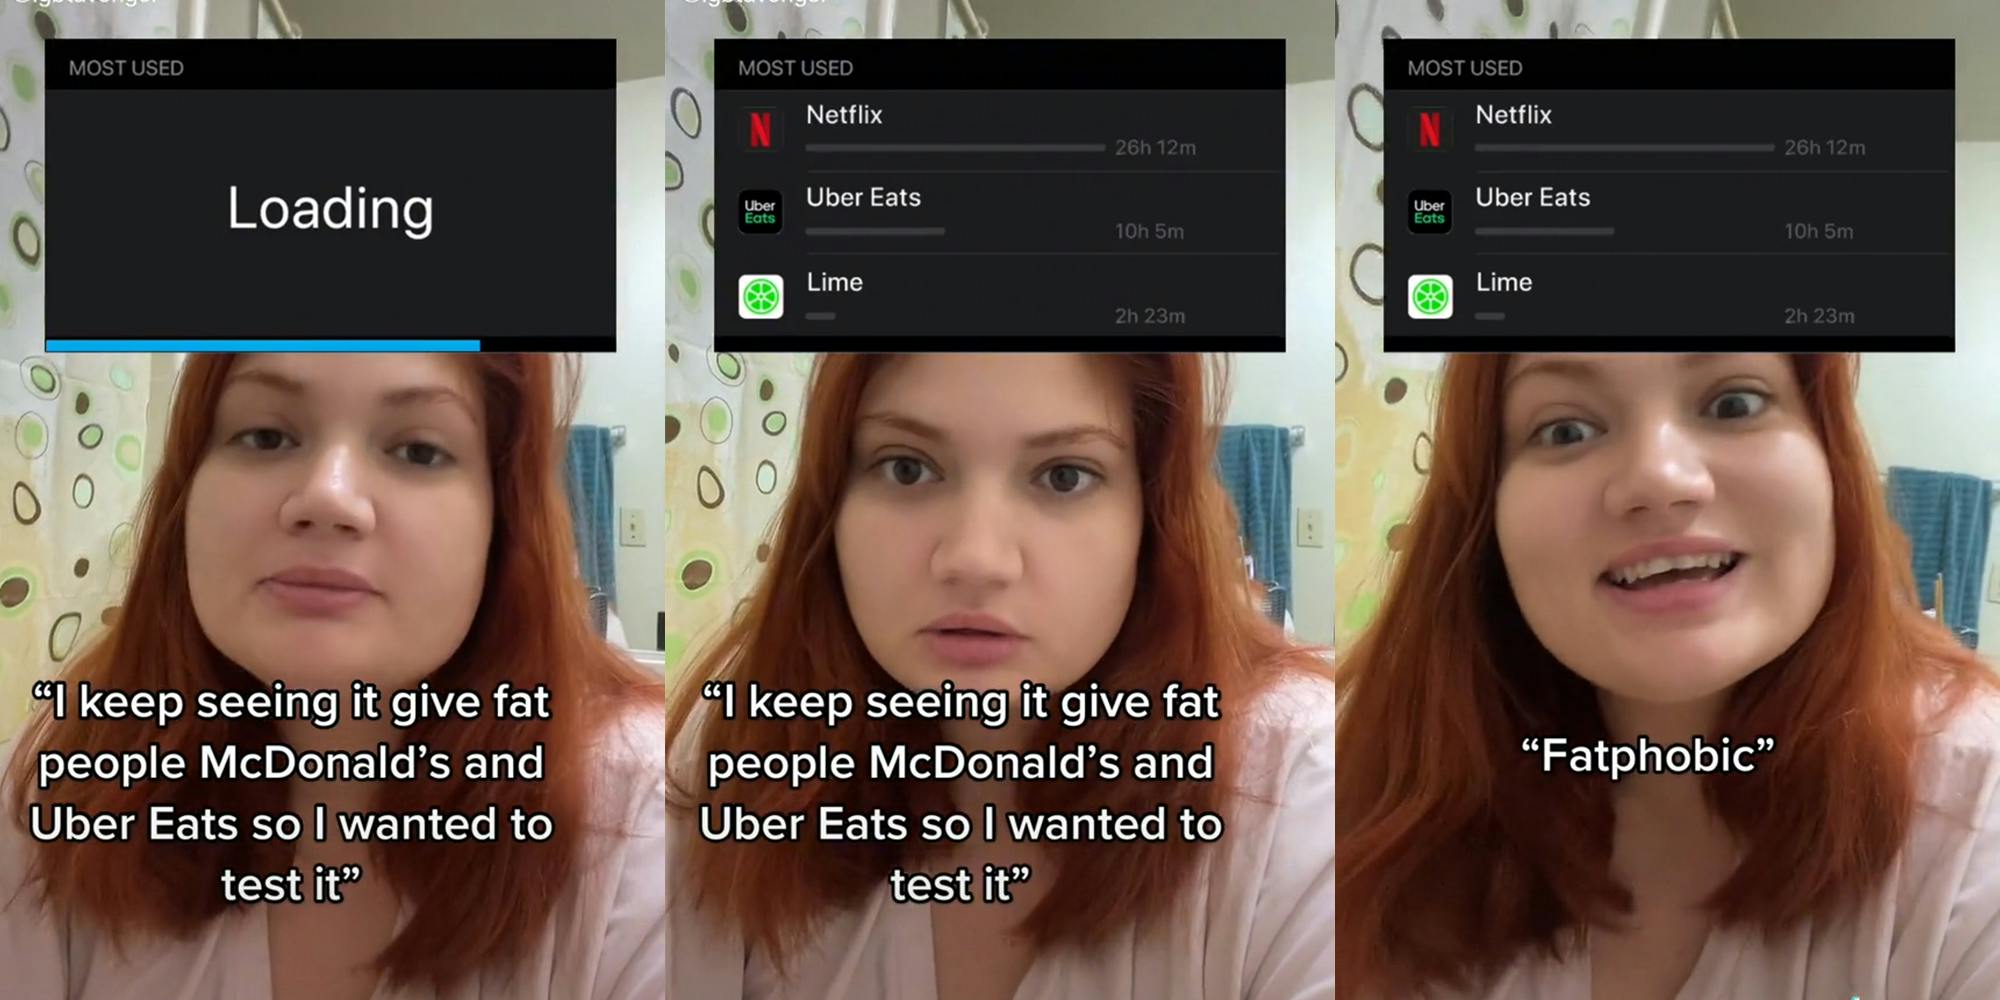 woman with tiktok filter and captions "i keep seeing it give fat people McDonald's and Uber Eats so I wanted to test it" and "Fatphobic"